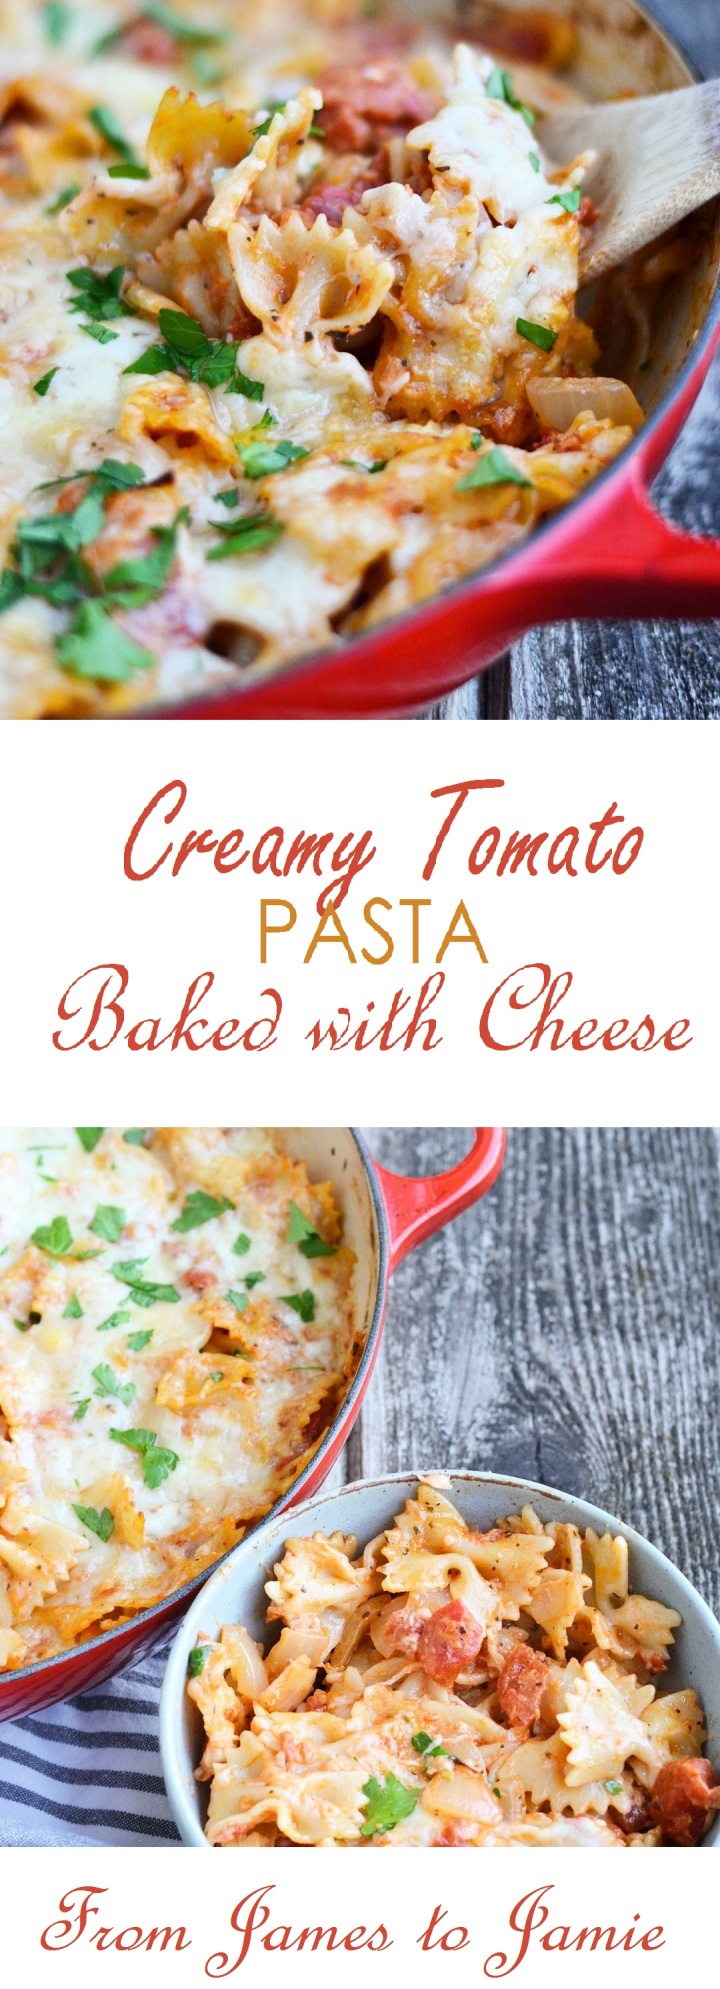 creamy-tomato-pasta-baked-with-cheese